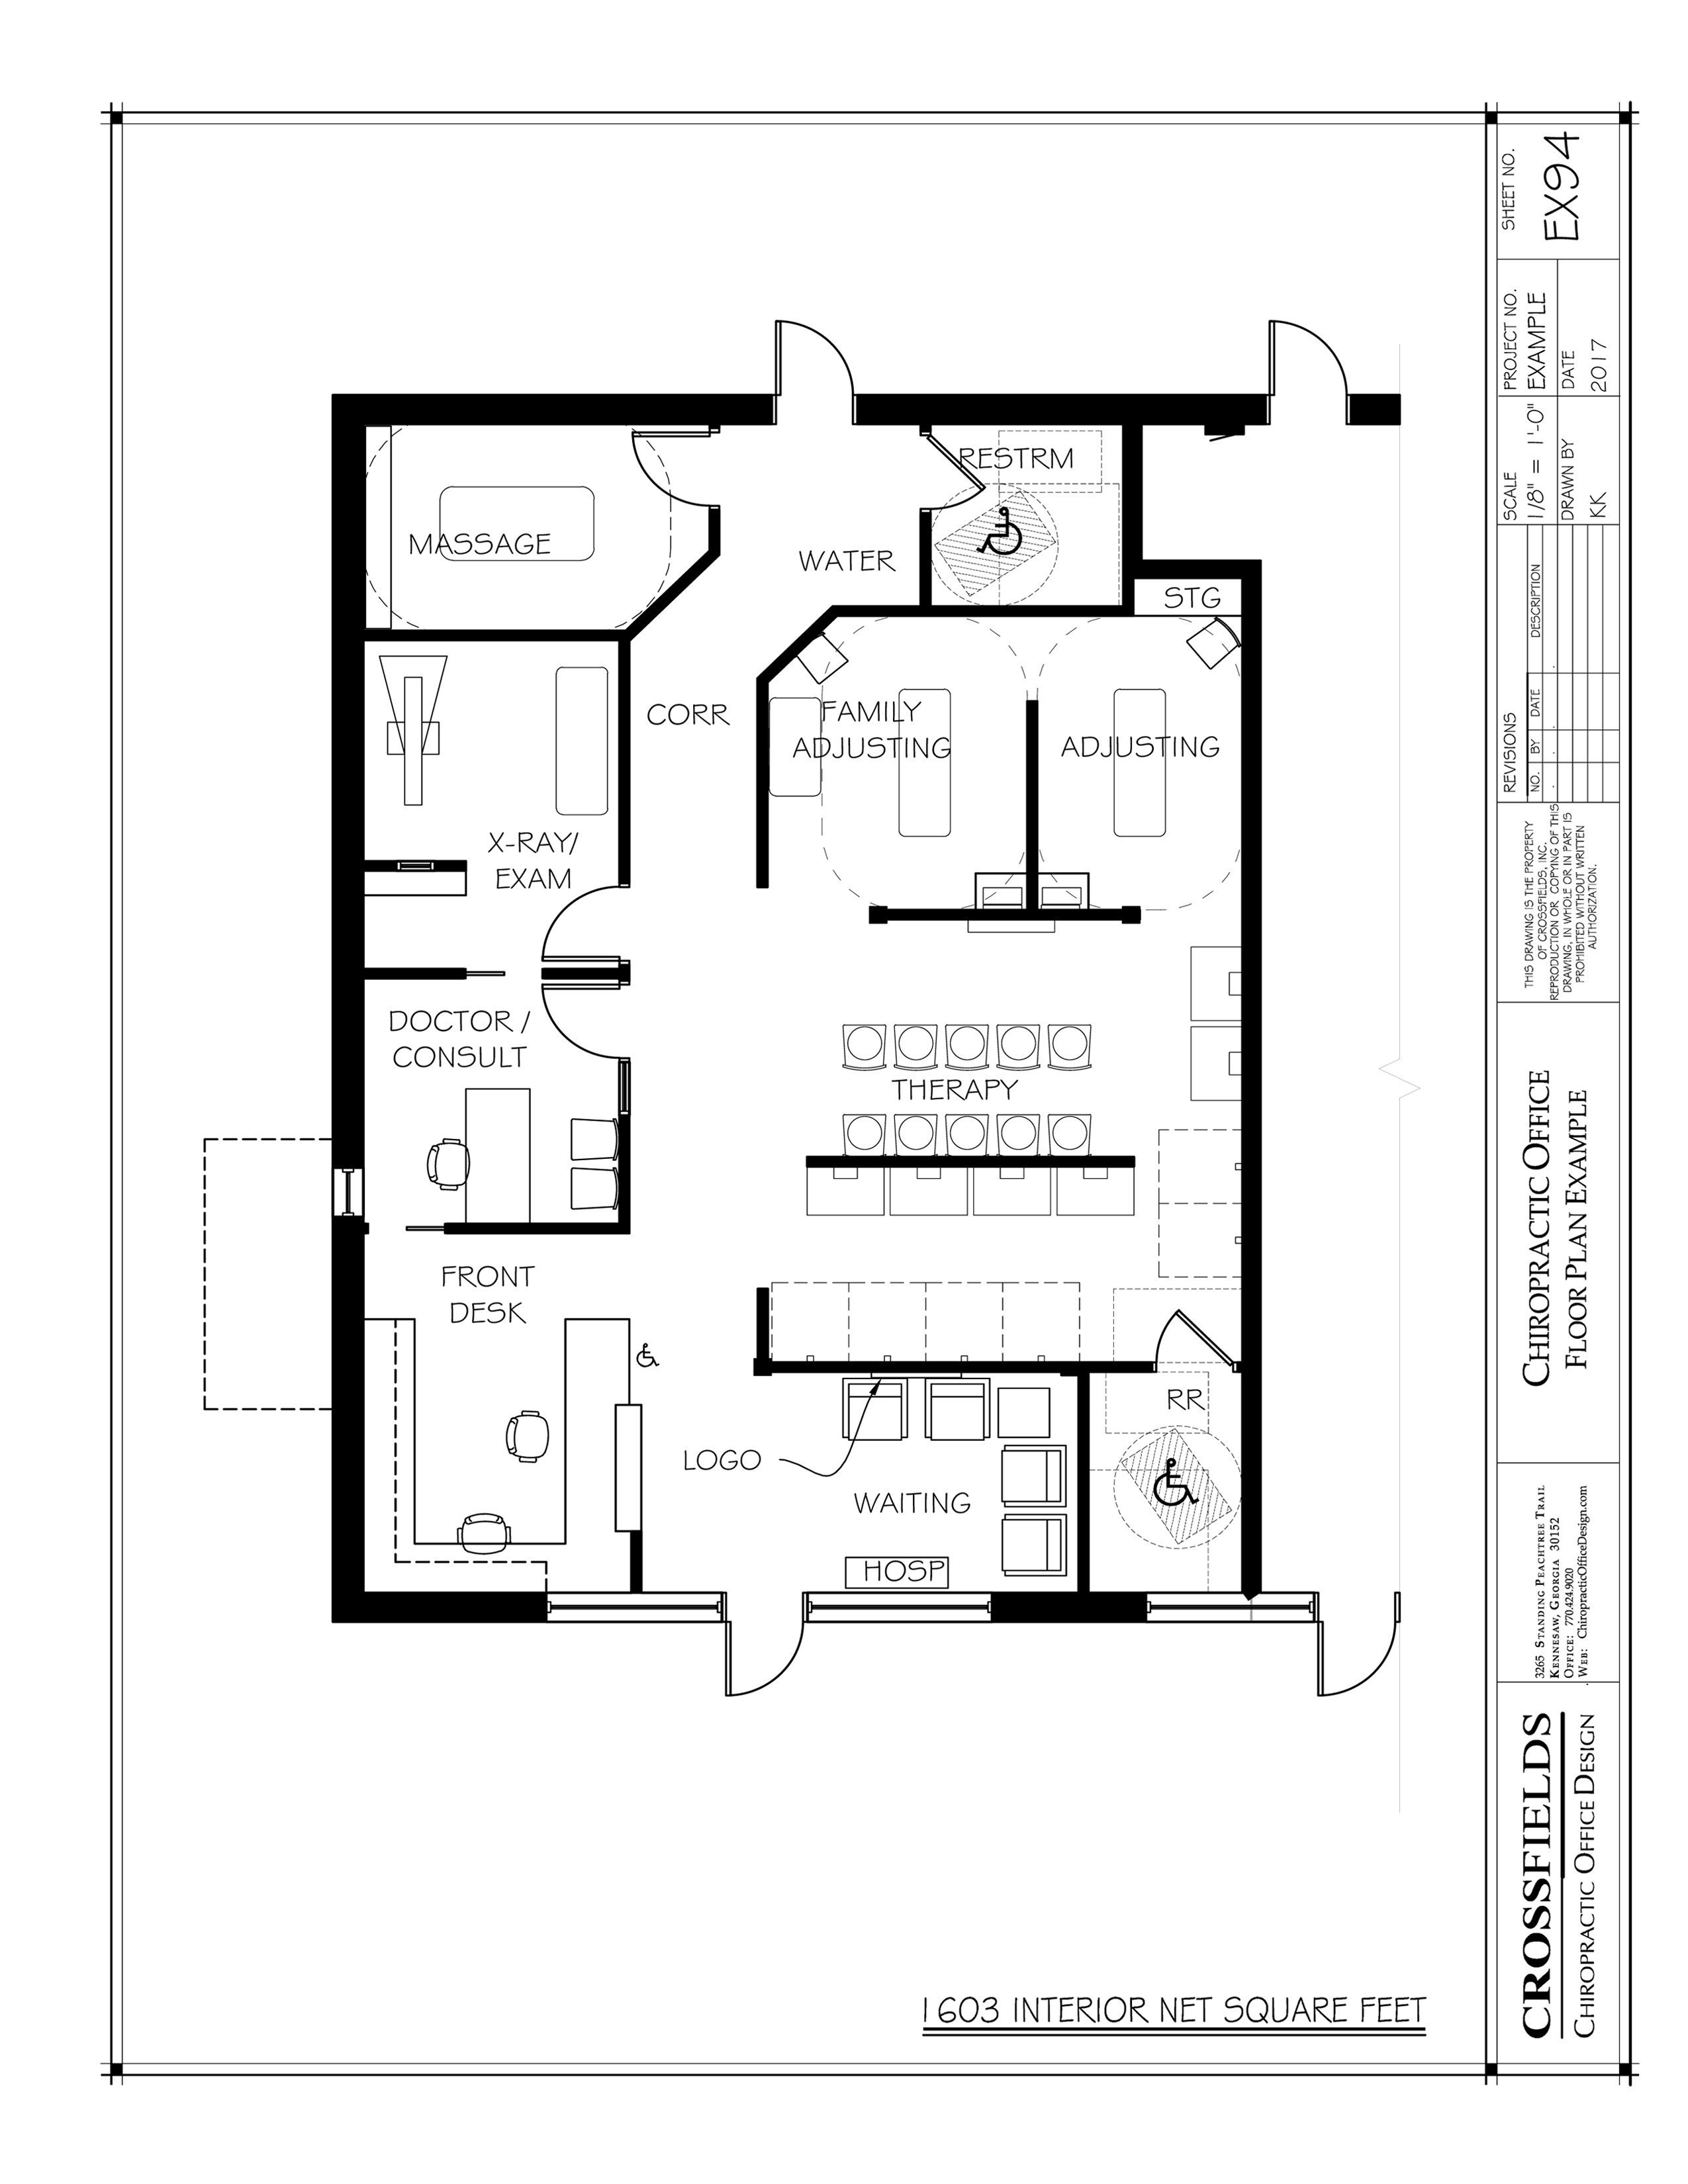 23 Stylish Hardwood Flooring 1000 Sq Ft 2024 free download hardwood flooring 1000 sq ft of 800 sq ft house plans elegant home plan design 800 sq ft awesome 30 in 800 sq ft house plans luxury square home plans luxury 700 square foot house plans house